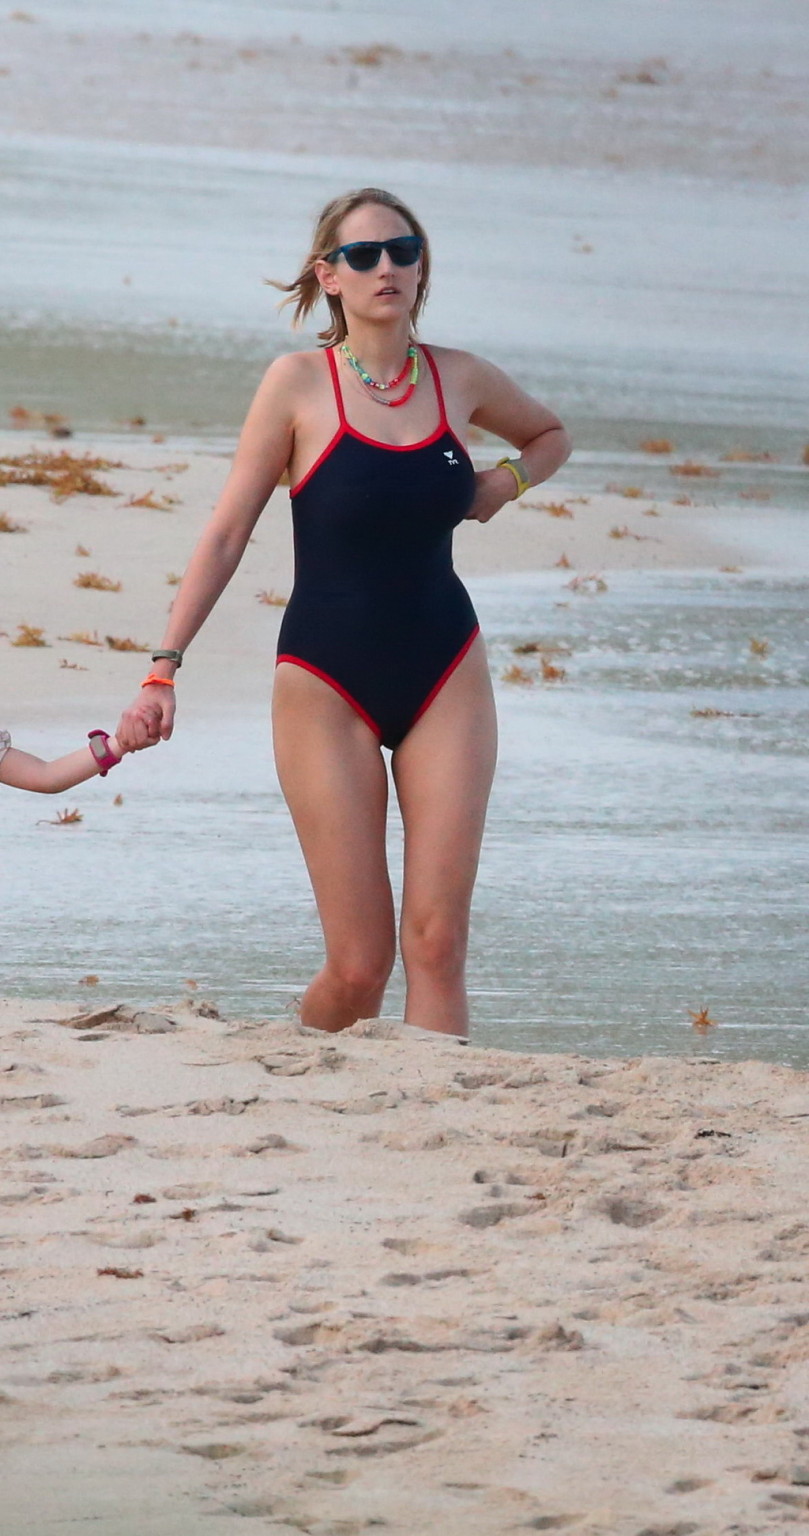 Leelee Sobieski showing her big boobs and ass in retro monokini at the beach in  #75176771